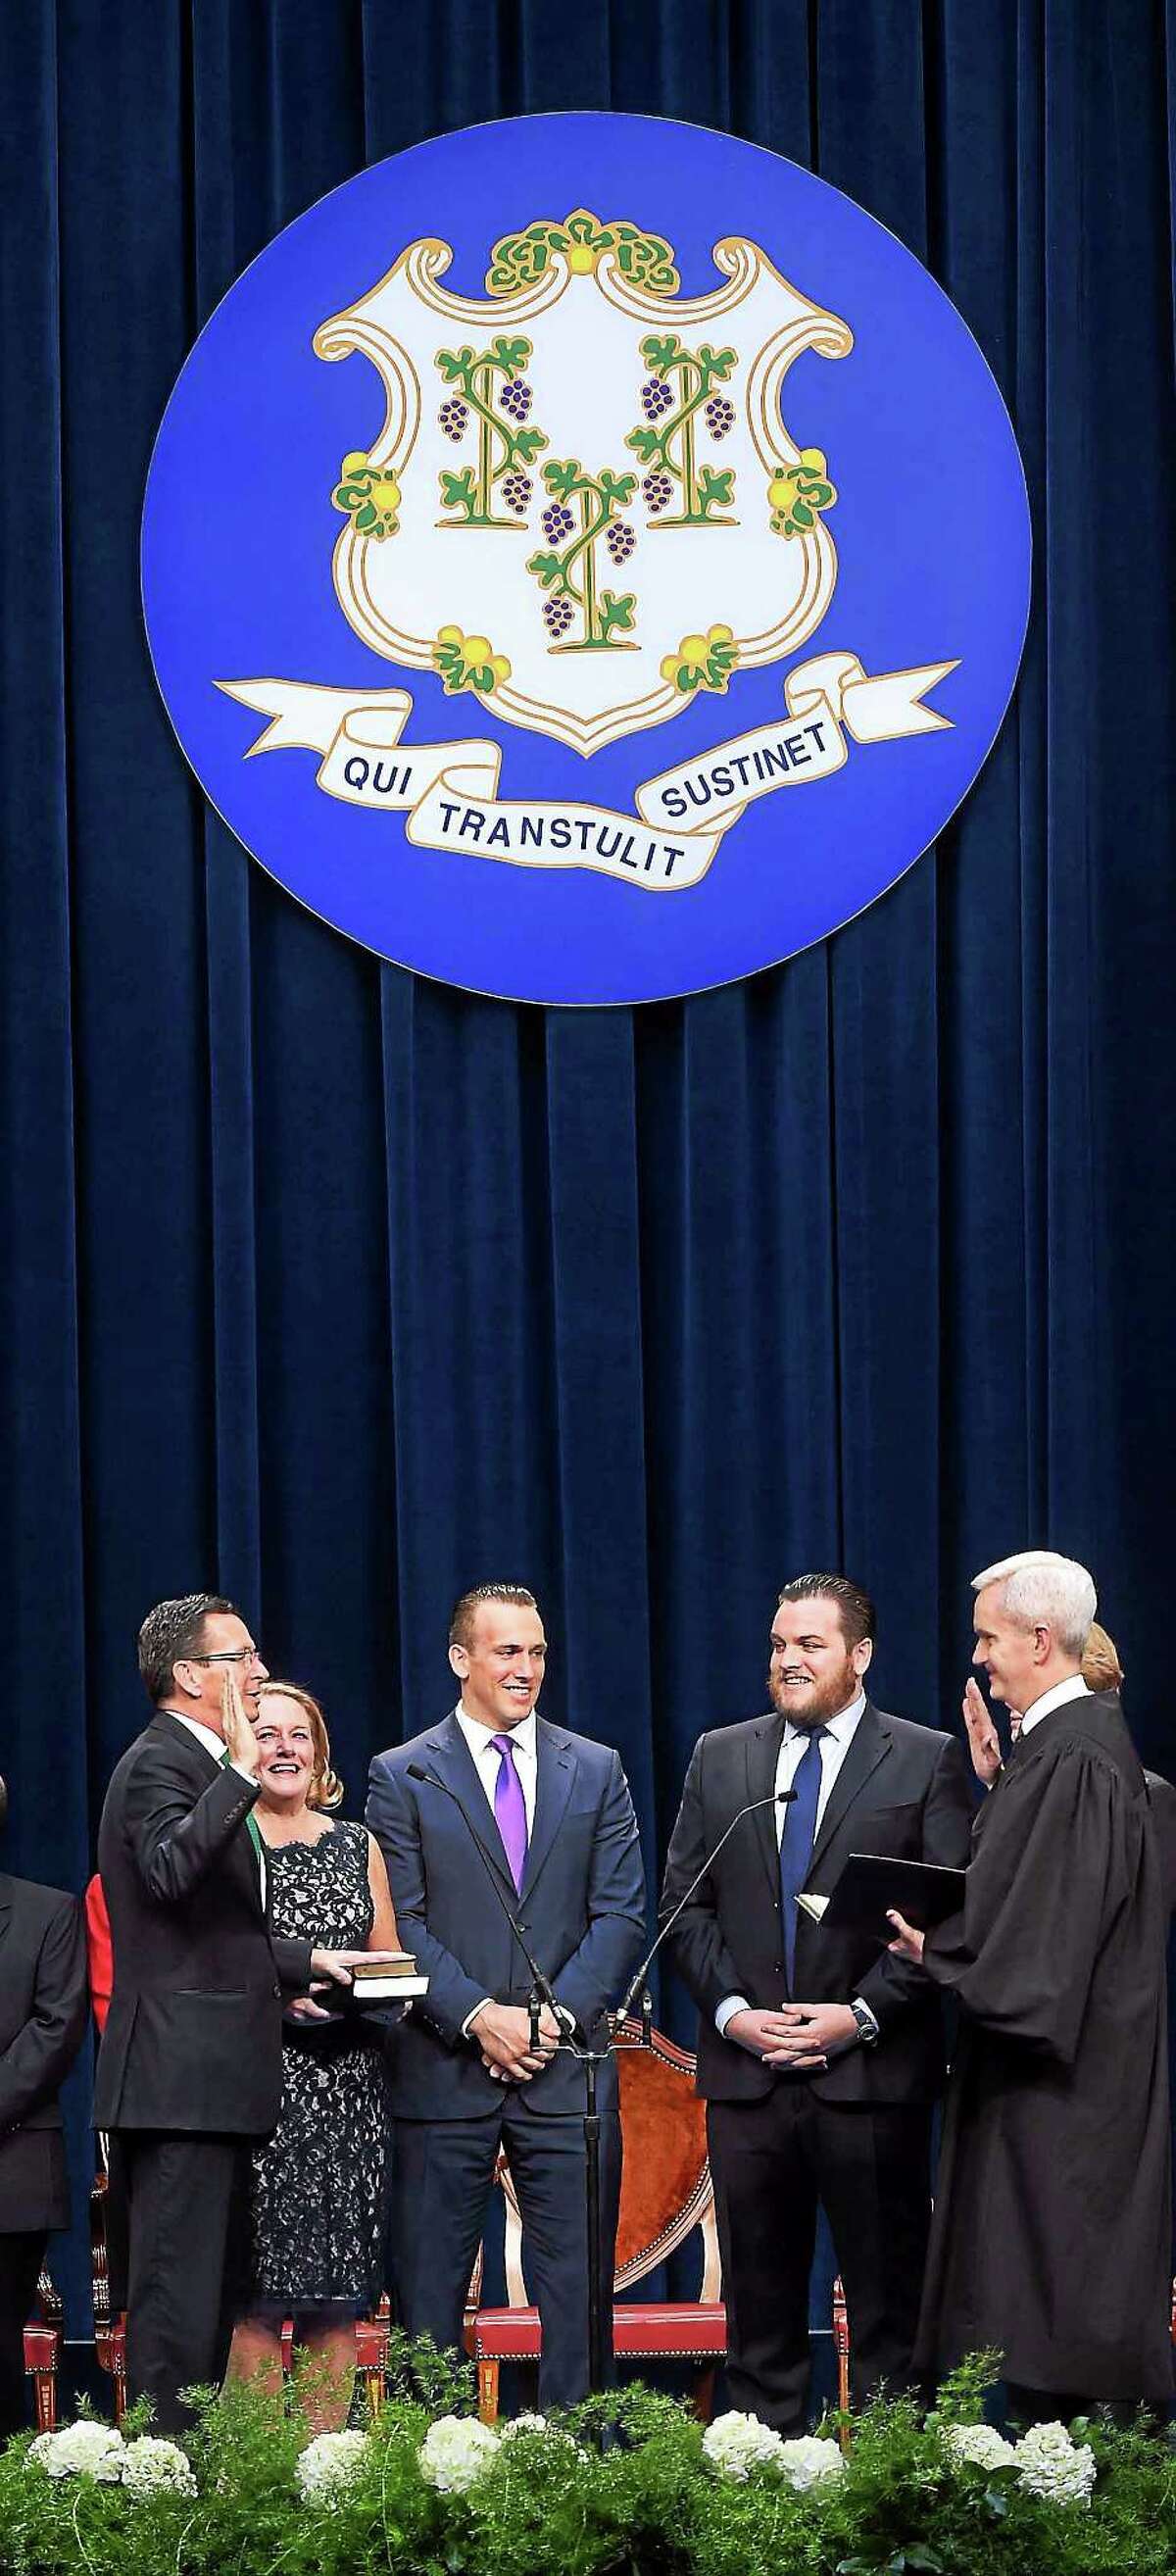 Governor Dannel P. Malloy (left) is sworn into office by Connecticut Supreme Court Justice Andrew J. McDonald (right) in the William A. O’Neill State Armory in Hartford on January 7, 2015.